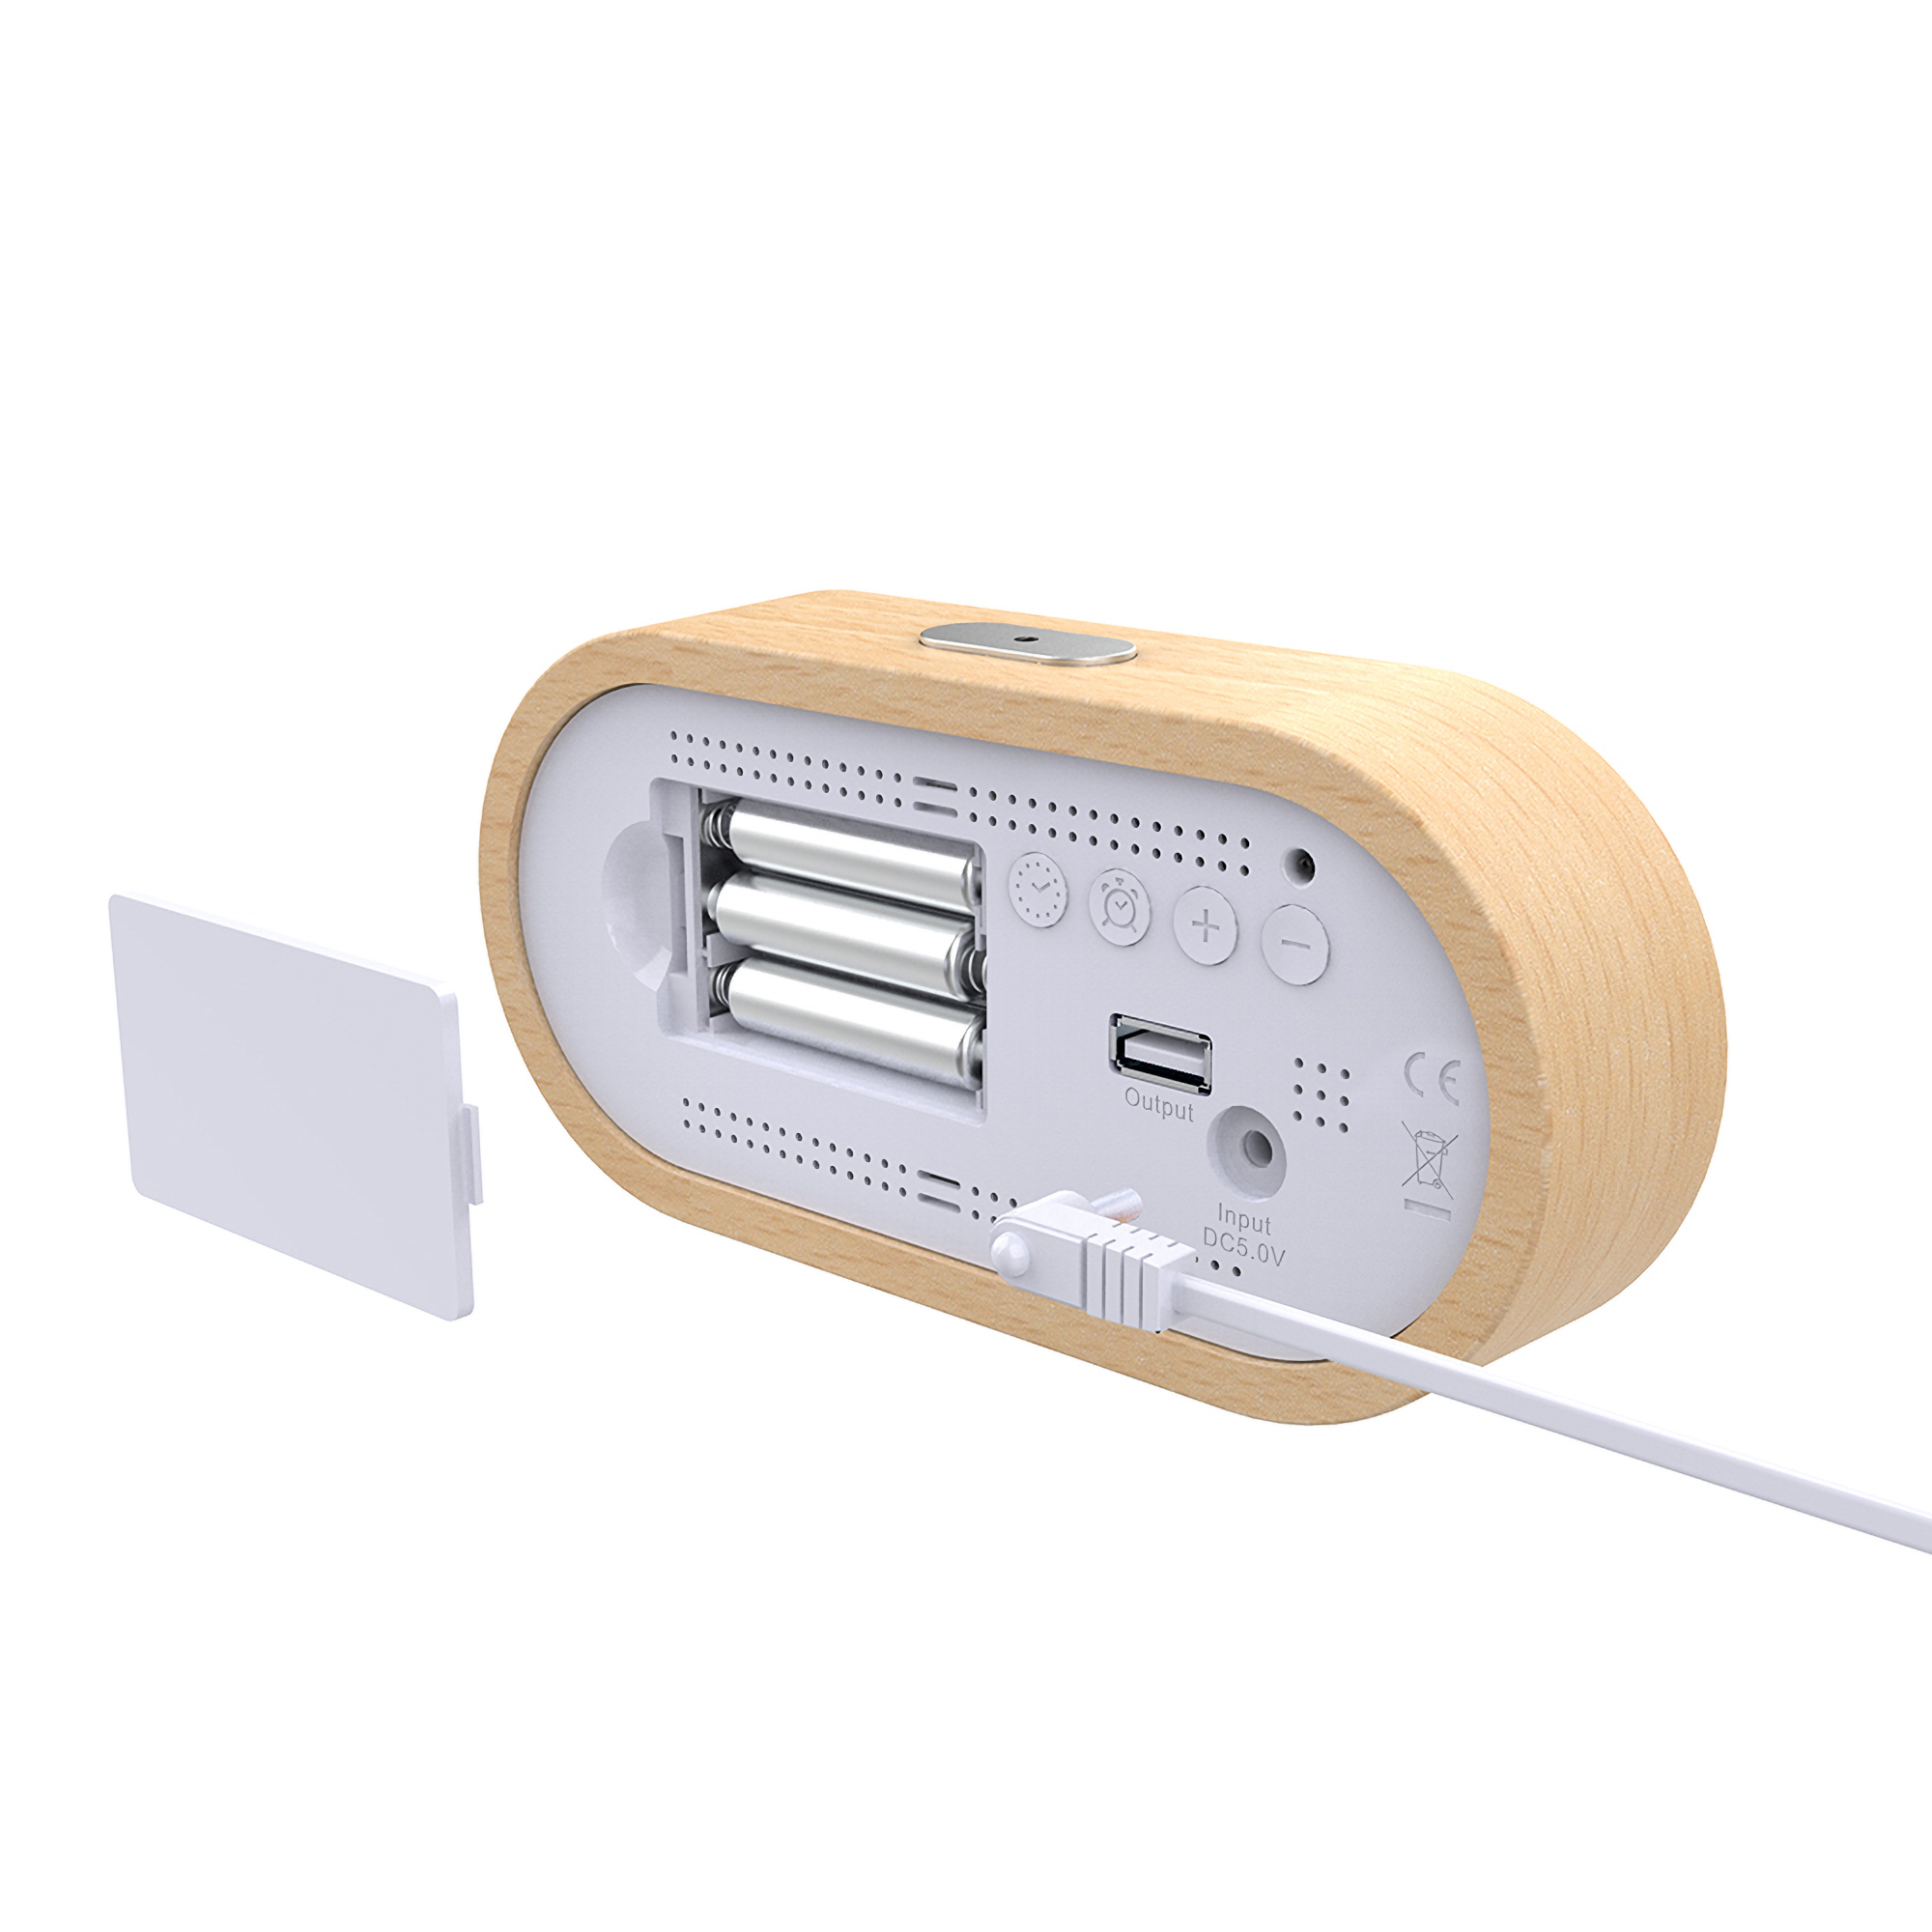 ATTALOS DTWX7 LED Wecker AAA-Batterie USB- - und HOLZ